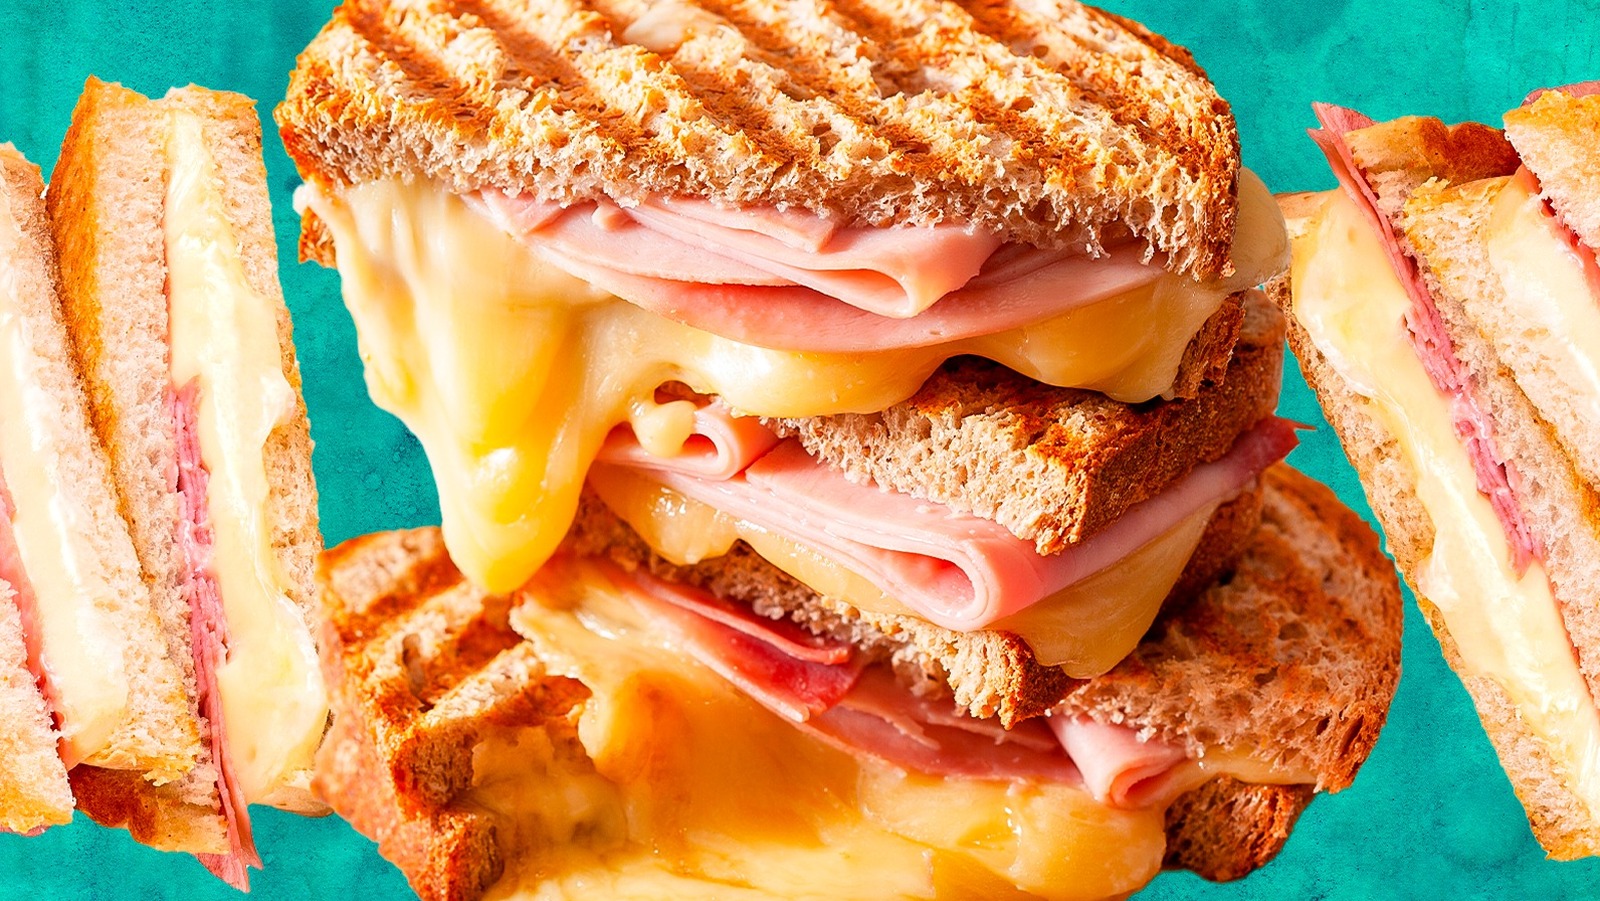 https://www.thedailymeal.com/img/gallery/14-ways-to-easily-upgrade-a-classic-ham-and-cheese-sandwich/l-intro-1683138610.jpg